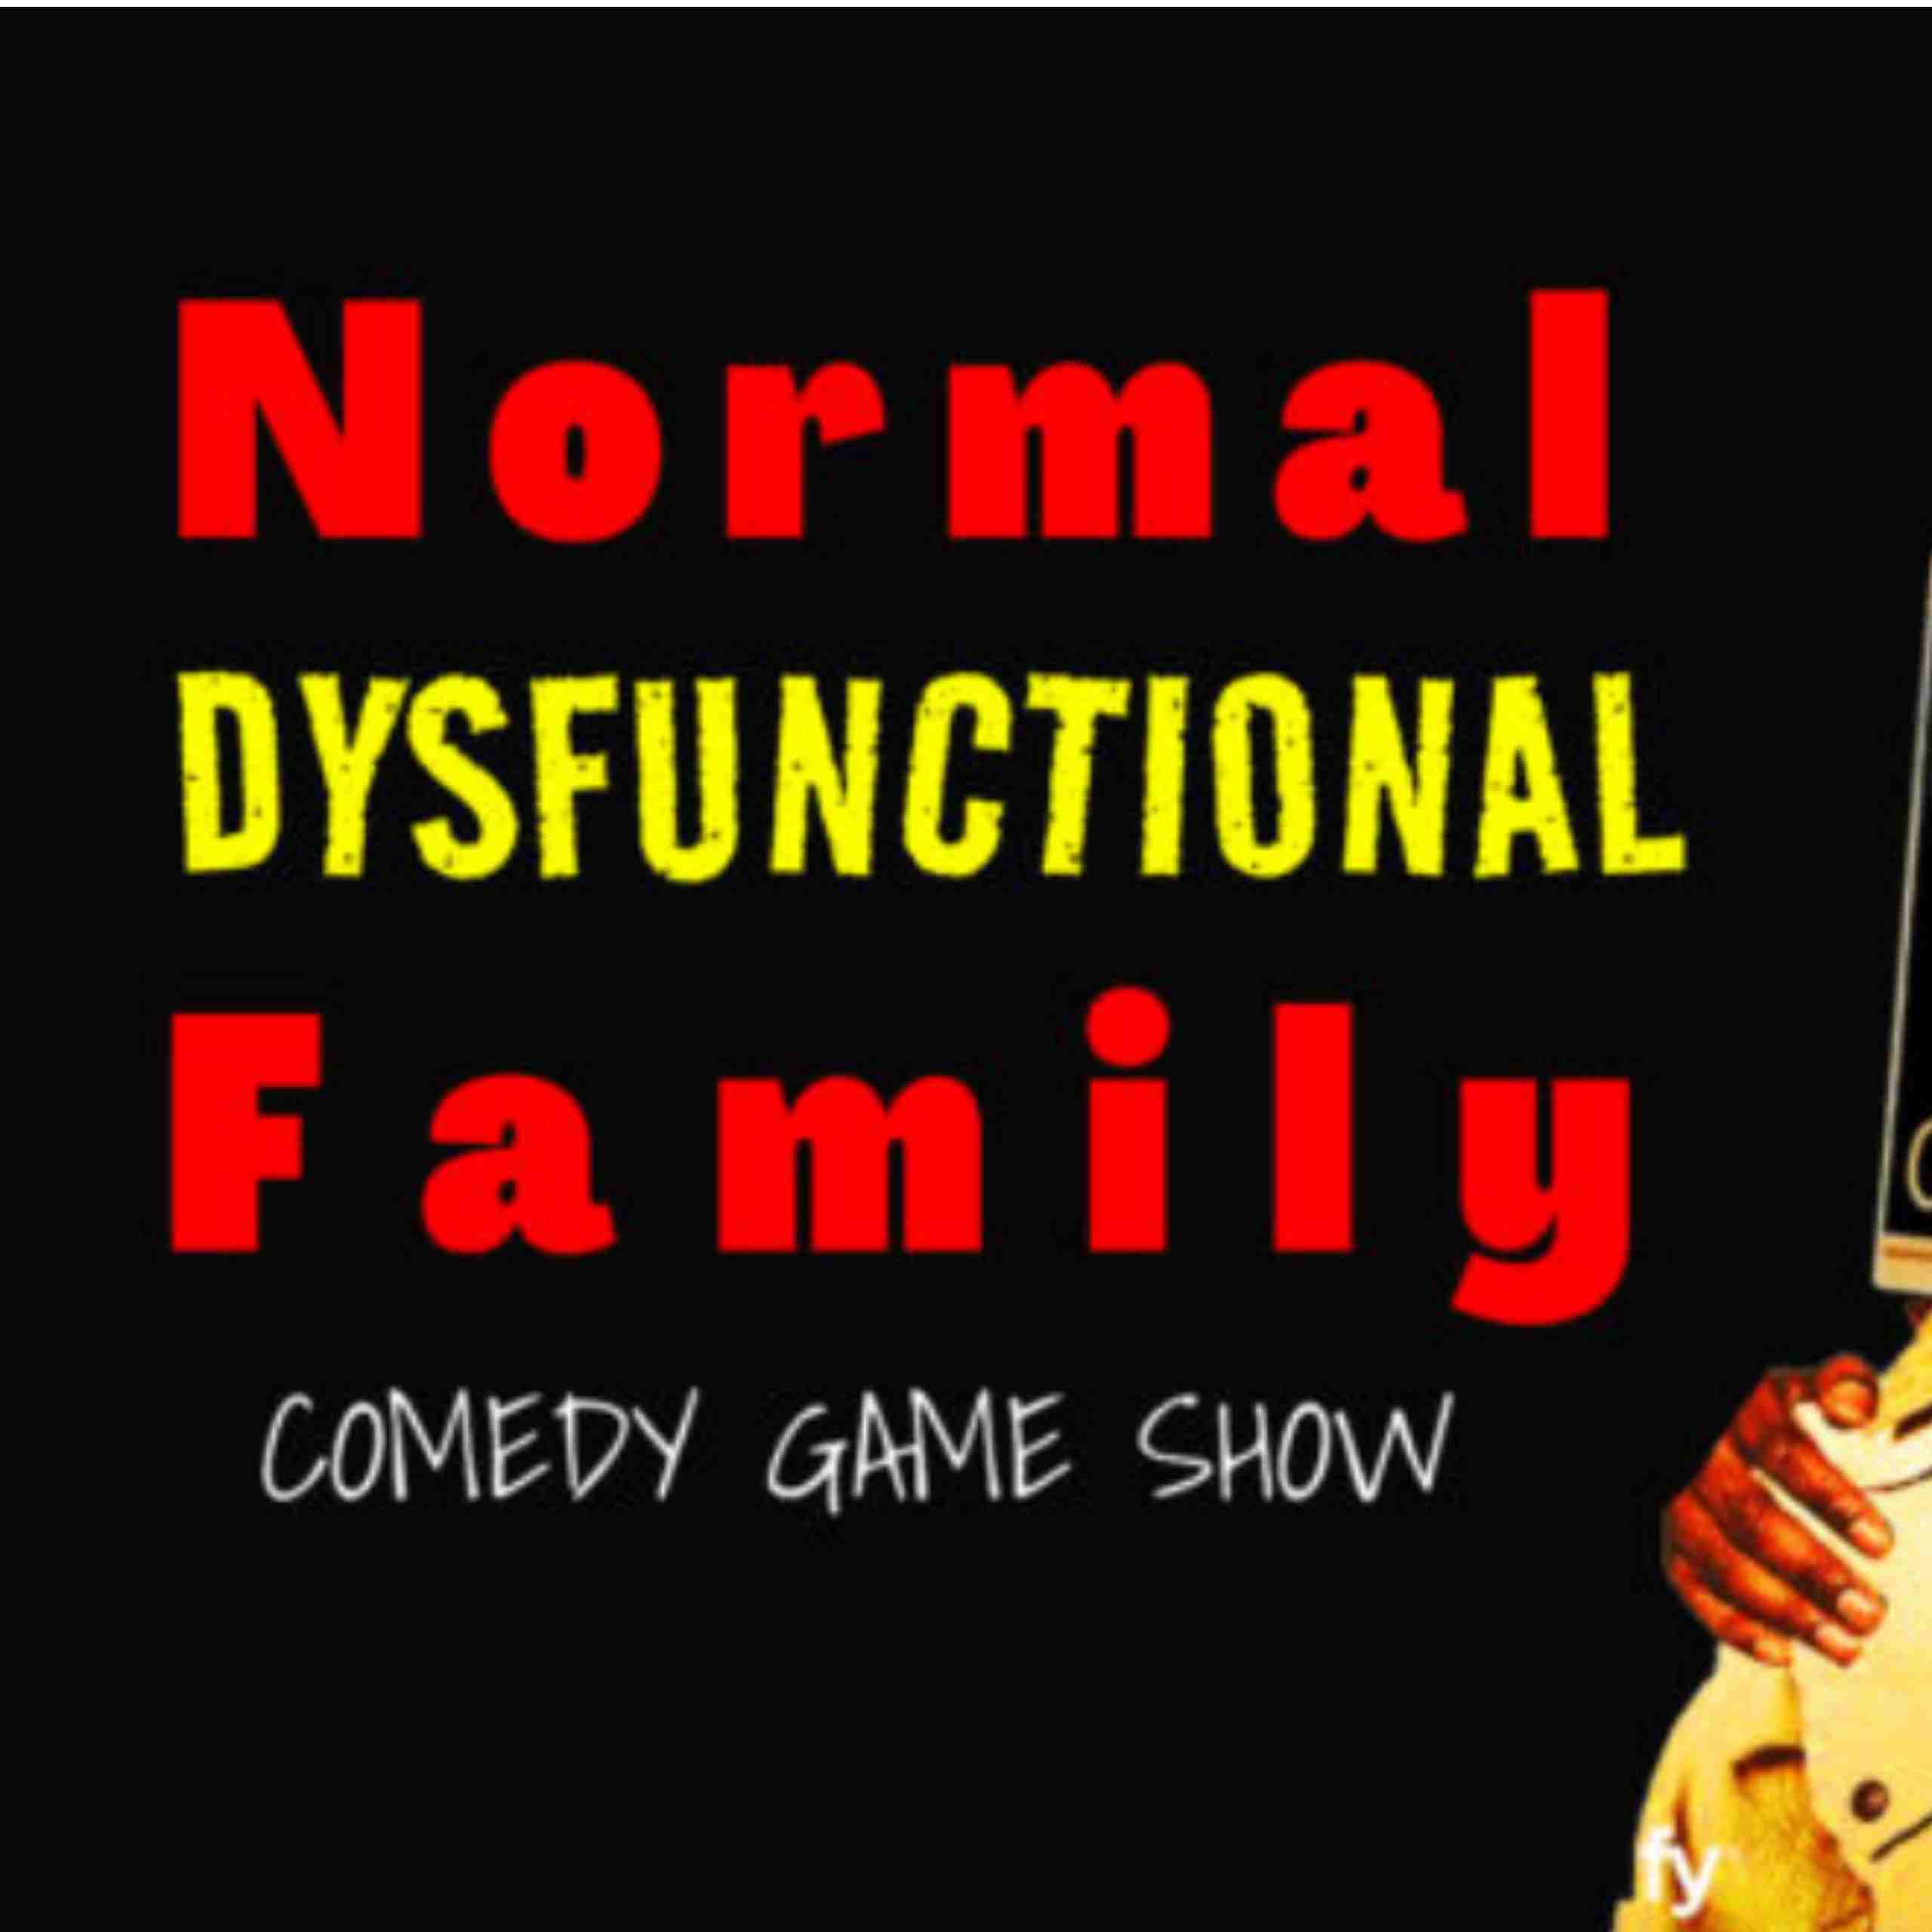 1001 Normal Dysfunctional Families